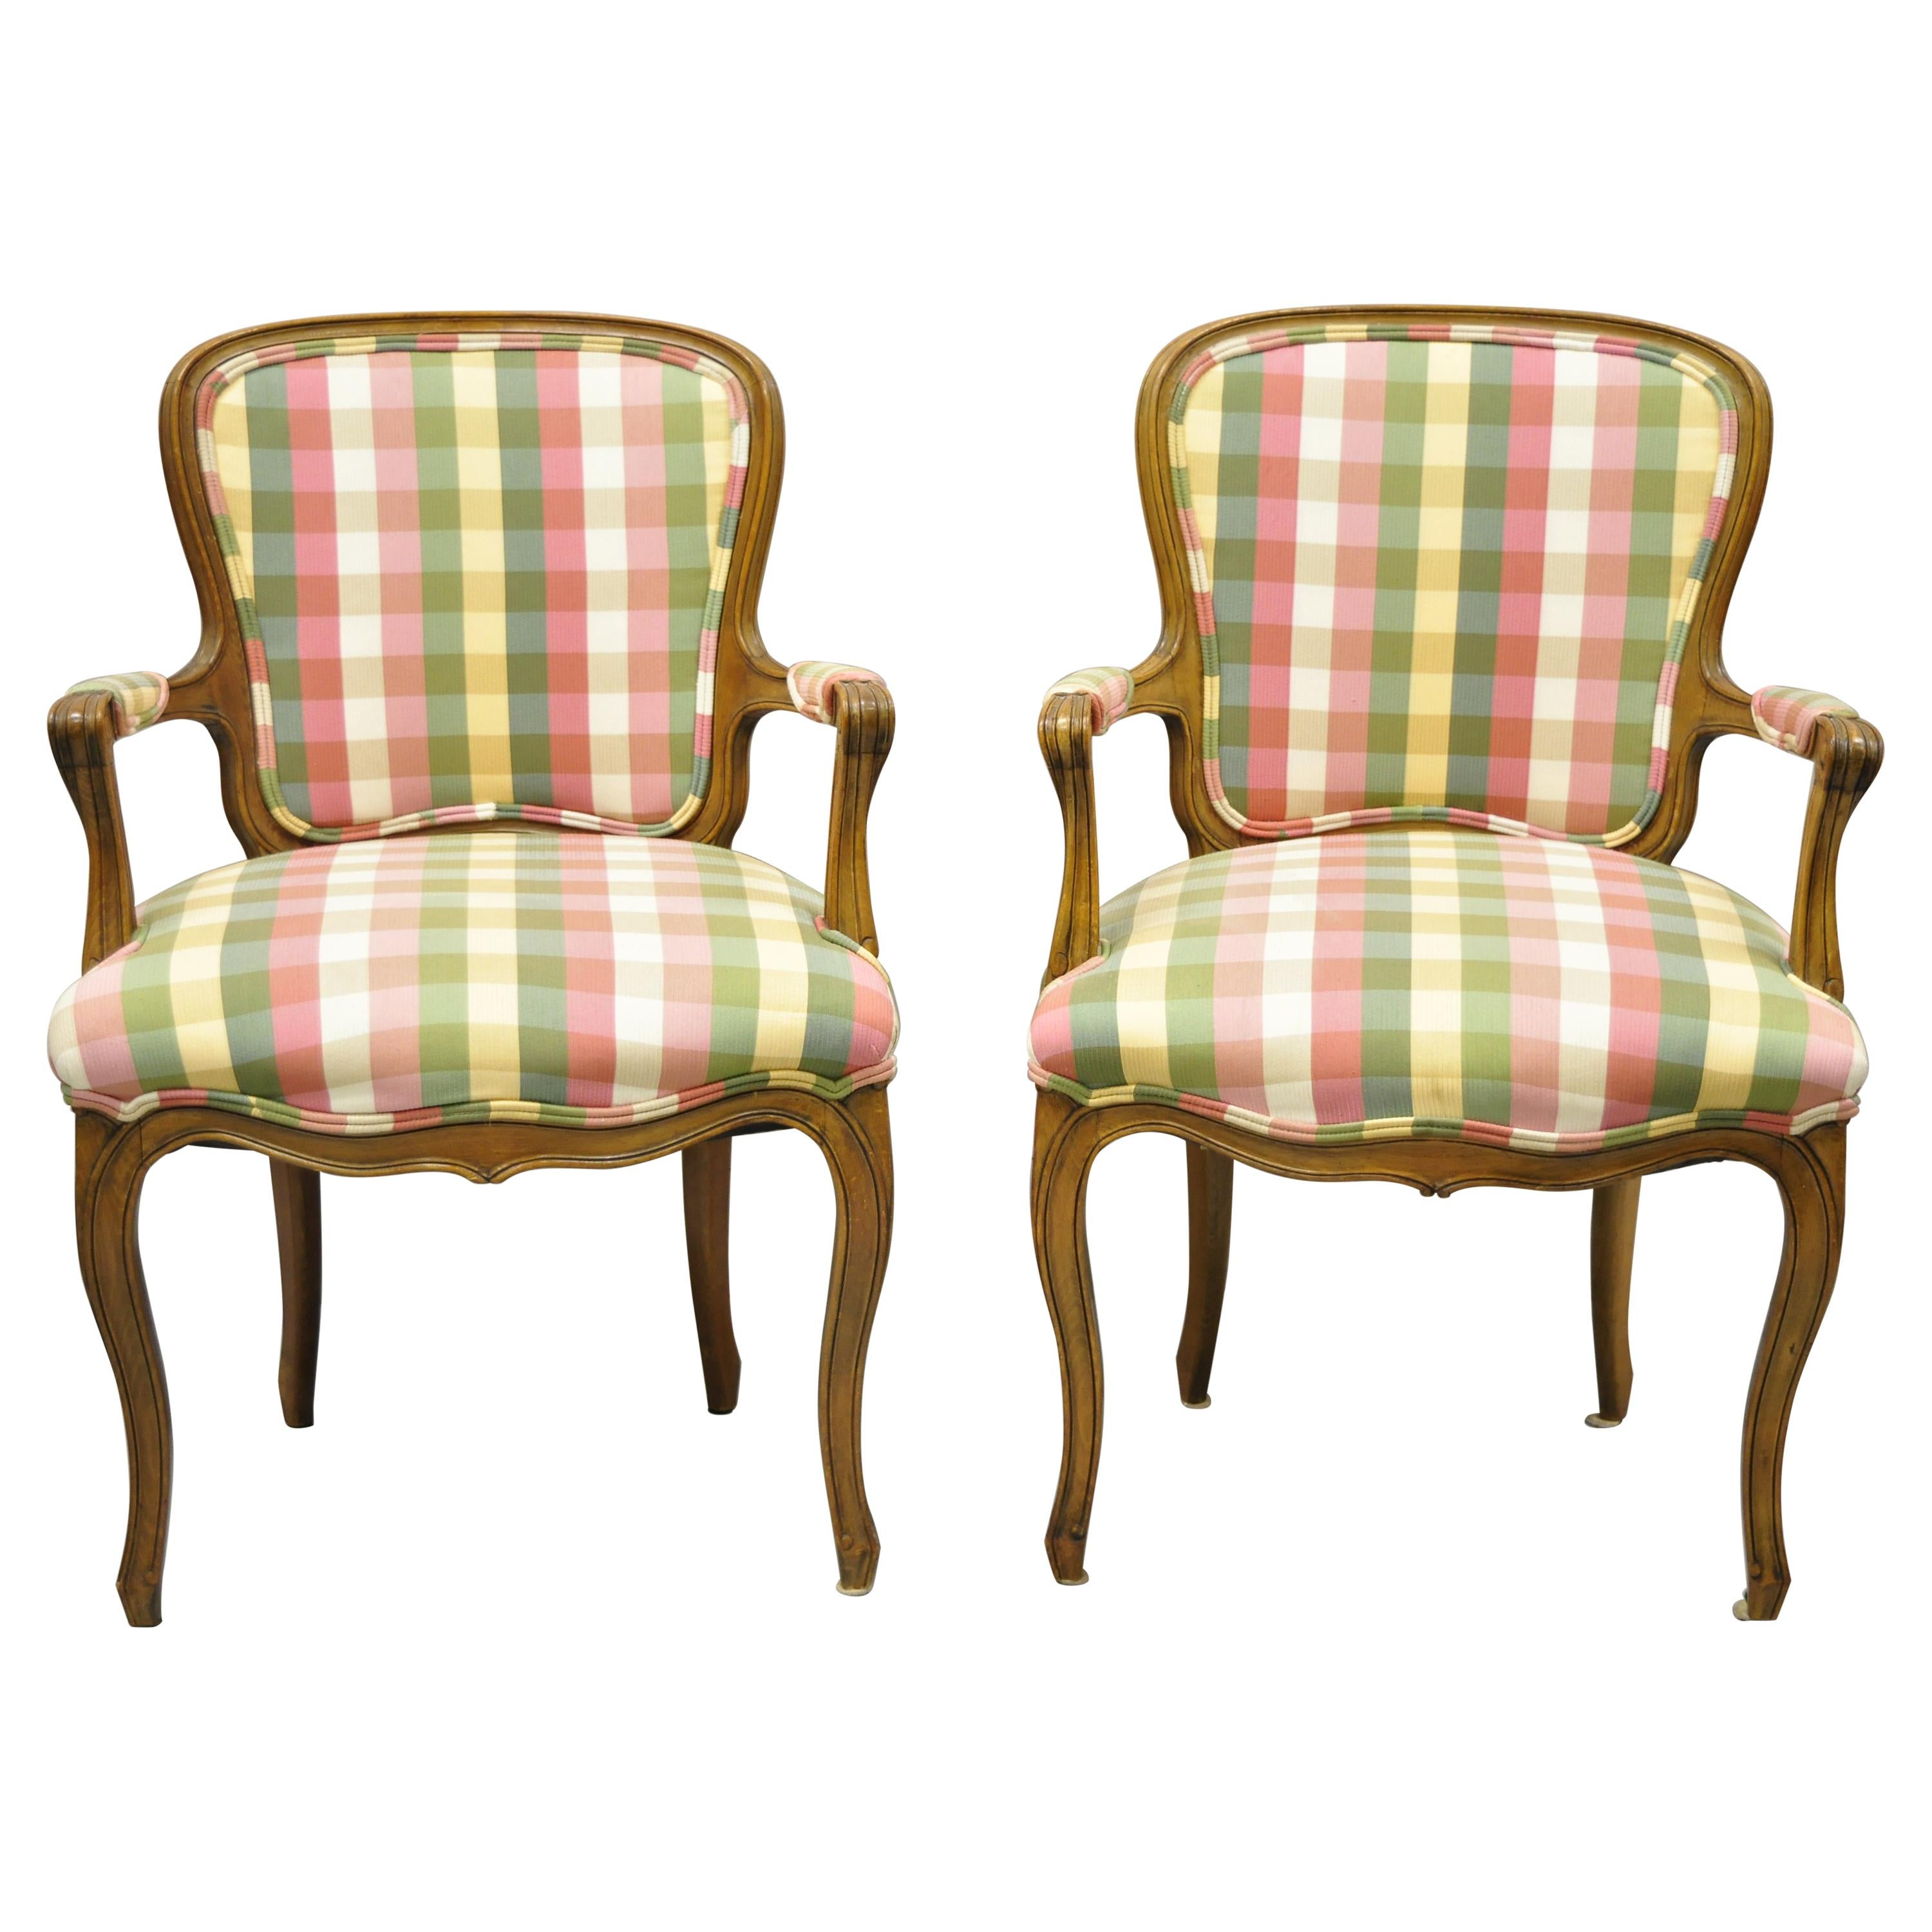 Vintage French Provincial Fauteuil Arm Chairs by Simon Loscertales Bona, a Pair